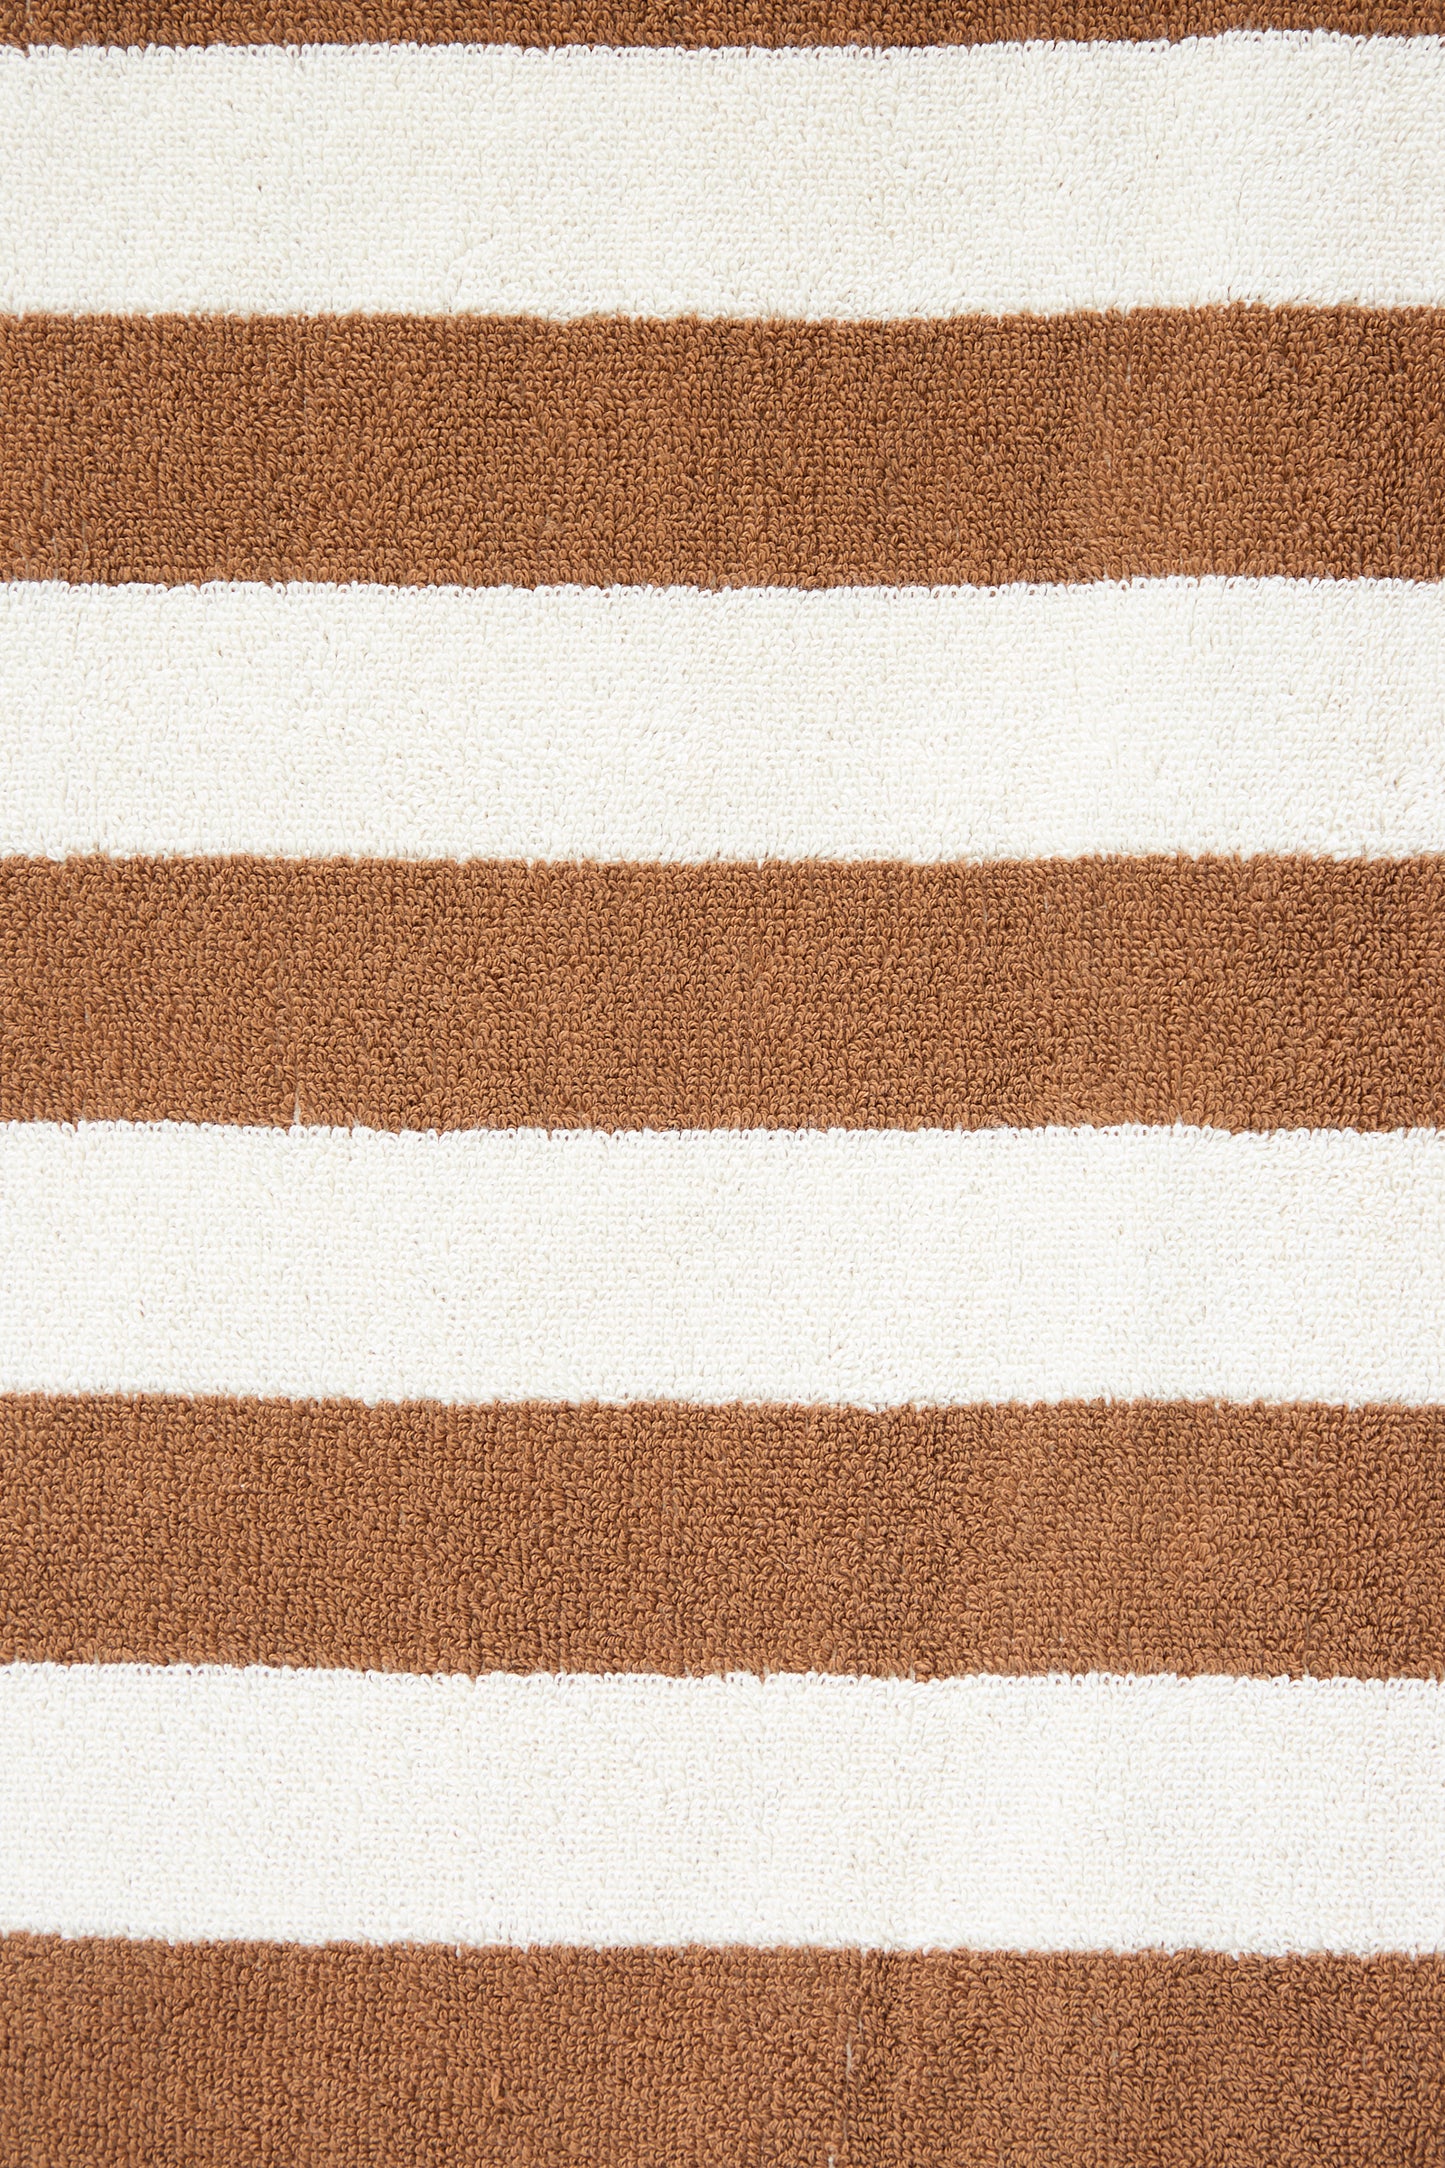 Close-up of an oversized Maria Pool Towel made with organic cotton, featuring alternating horizontal brown and white stripes by Autumn Sonata.